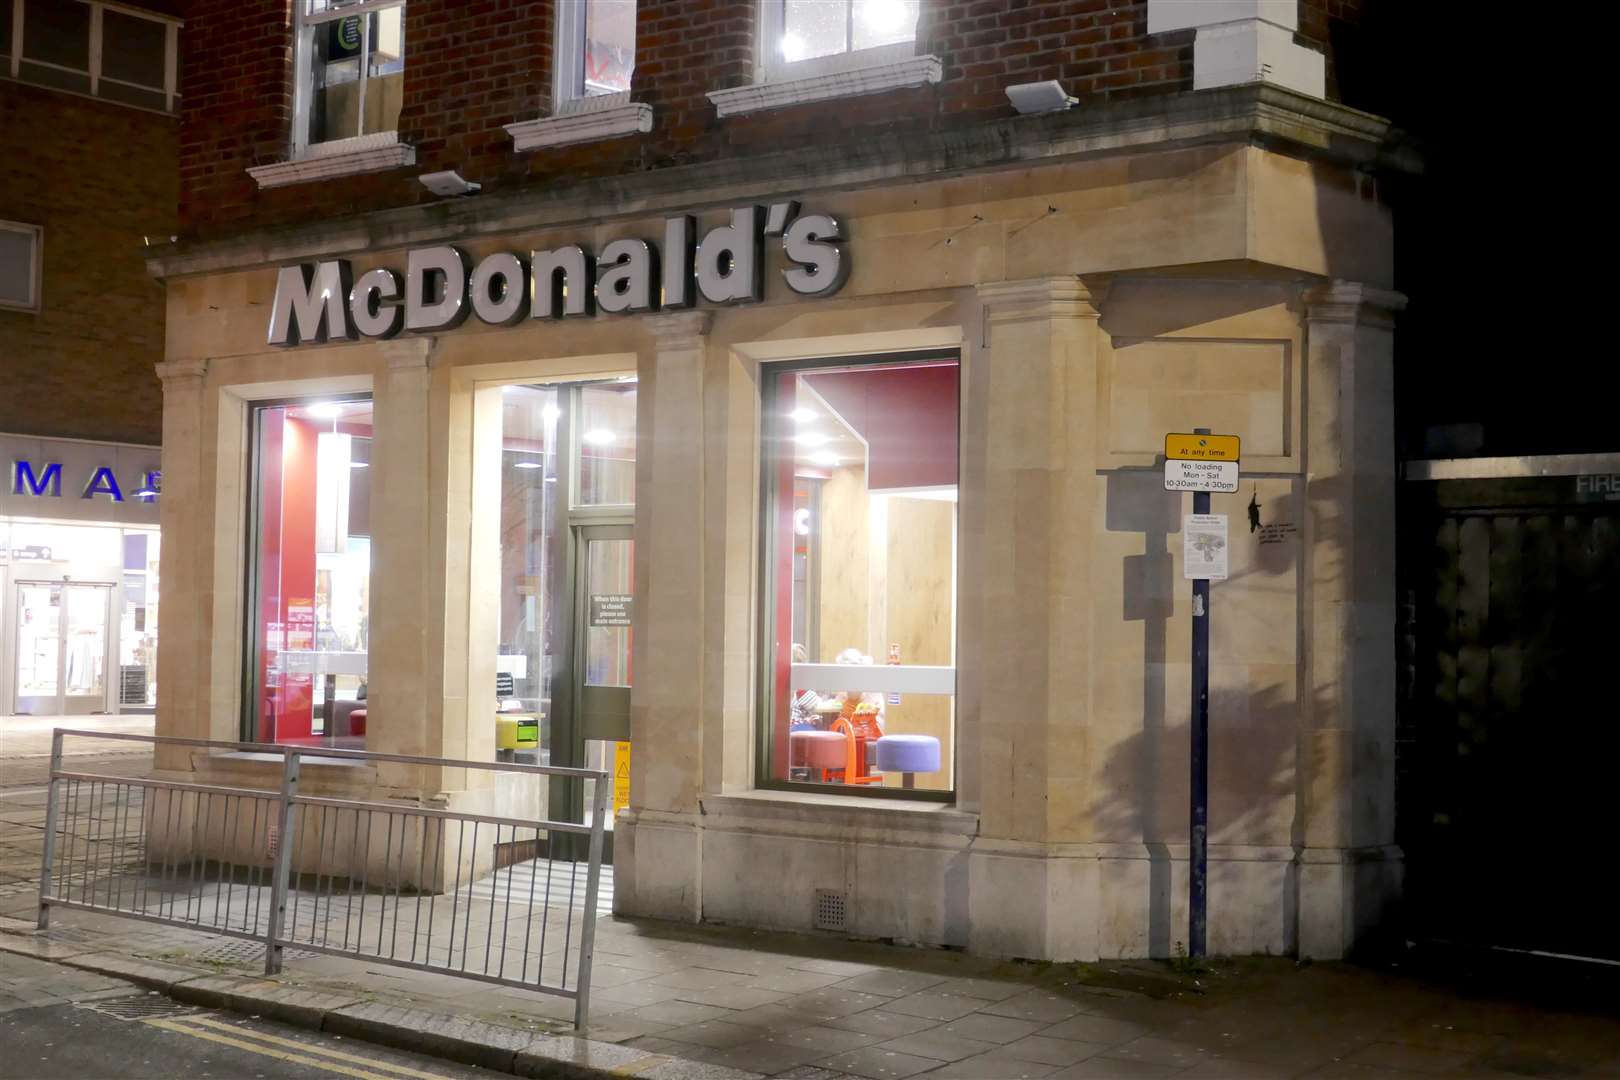 Visitors to McDonalds in Gravesend are greeted by a profound message. (7059144). Picture by Fraser Gray.